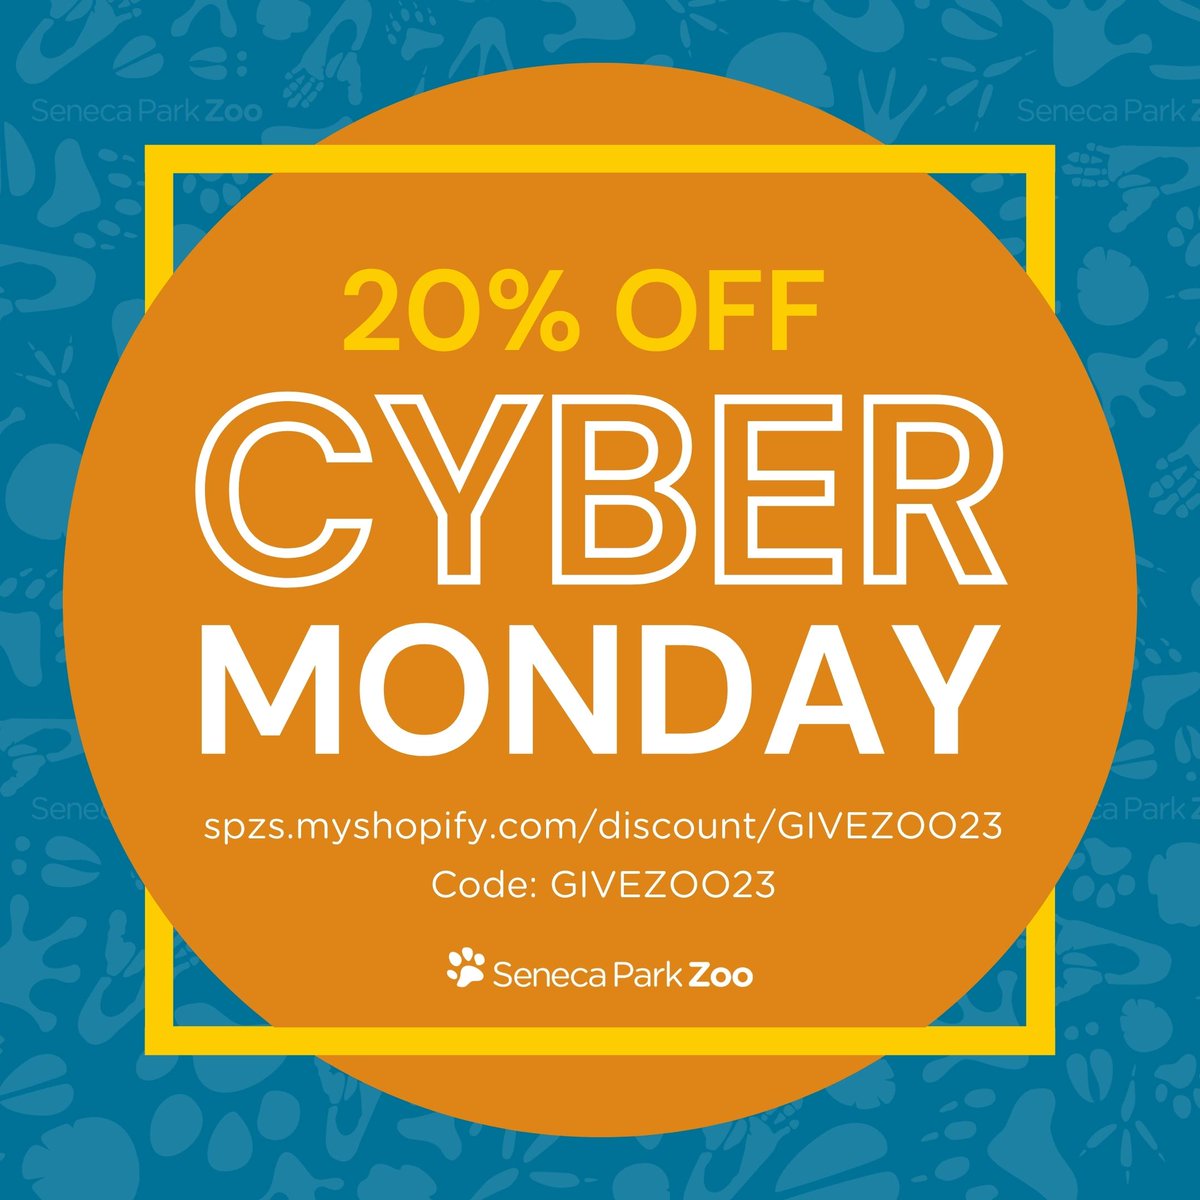 Take advantage of our Cyber Monday Membership deal!! Use code: GIVEZOO23 at checkout for 20% off when you join or give a Zoo membership today. Discount valid through 11:59 p.m. TONIGHT (Monday, November 27). 💻🙌🤩 Code: GIVEZOO23 Discount link: spzs.myshopify.com/discount/GIVEZ…